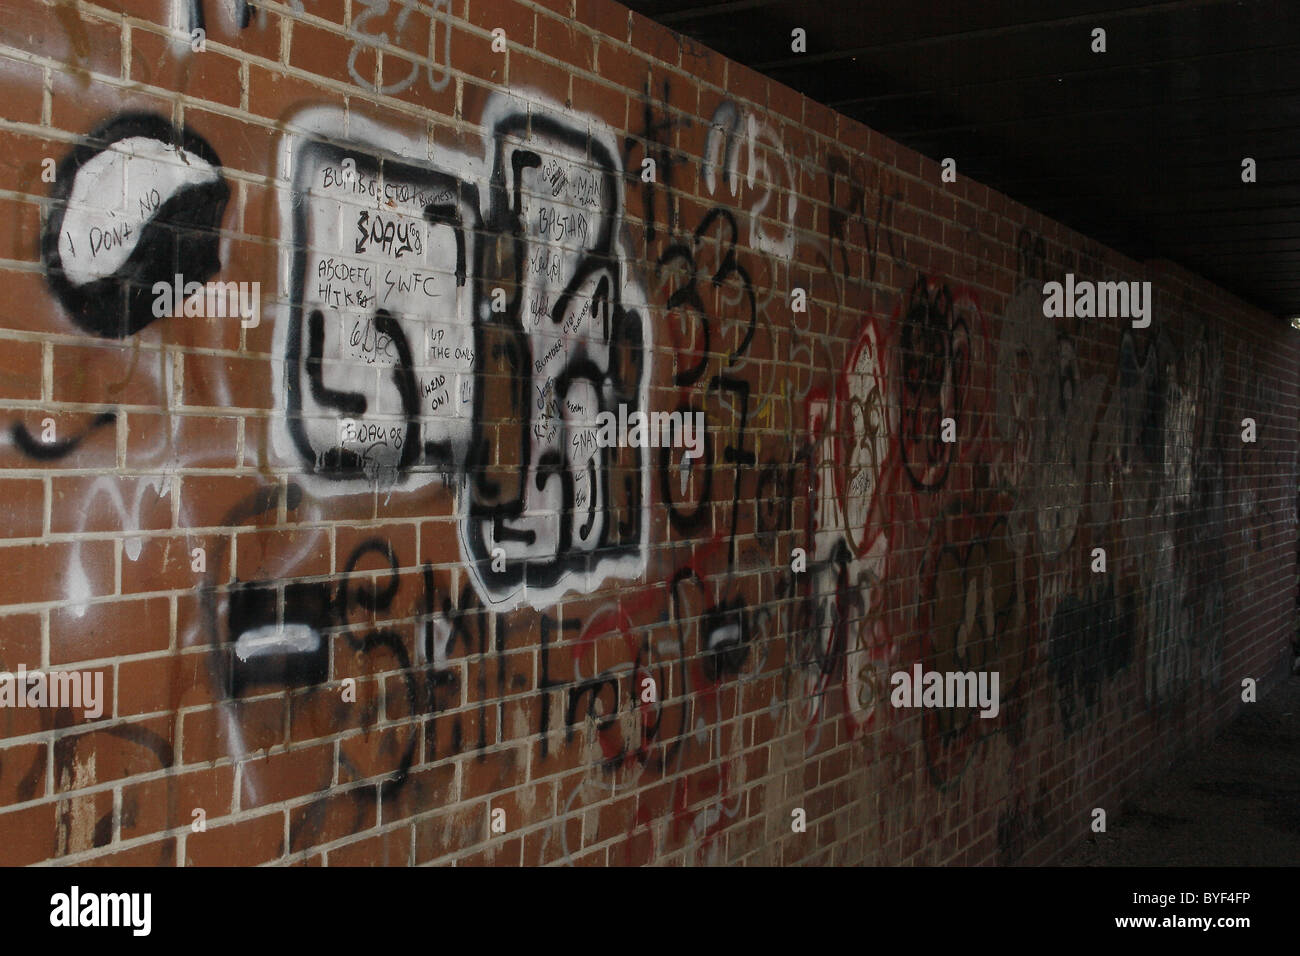 graffiti on wall under bridge on chesterfield canal, Worksop Stock Photo